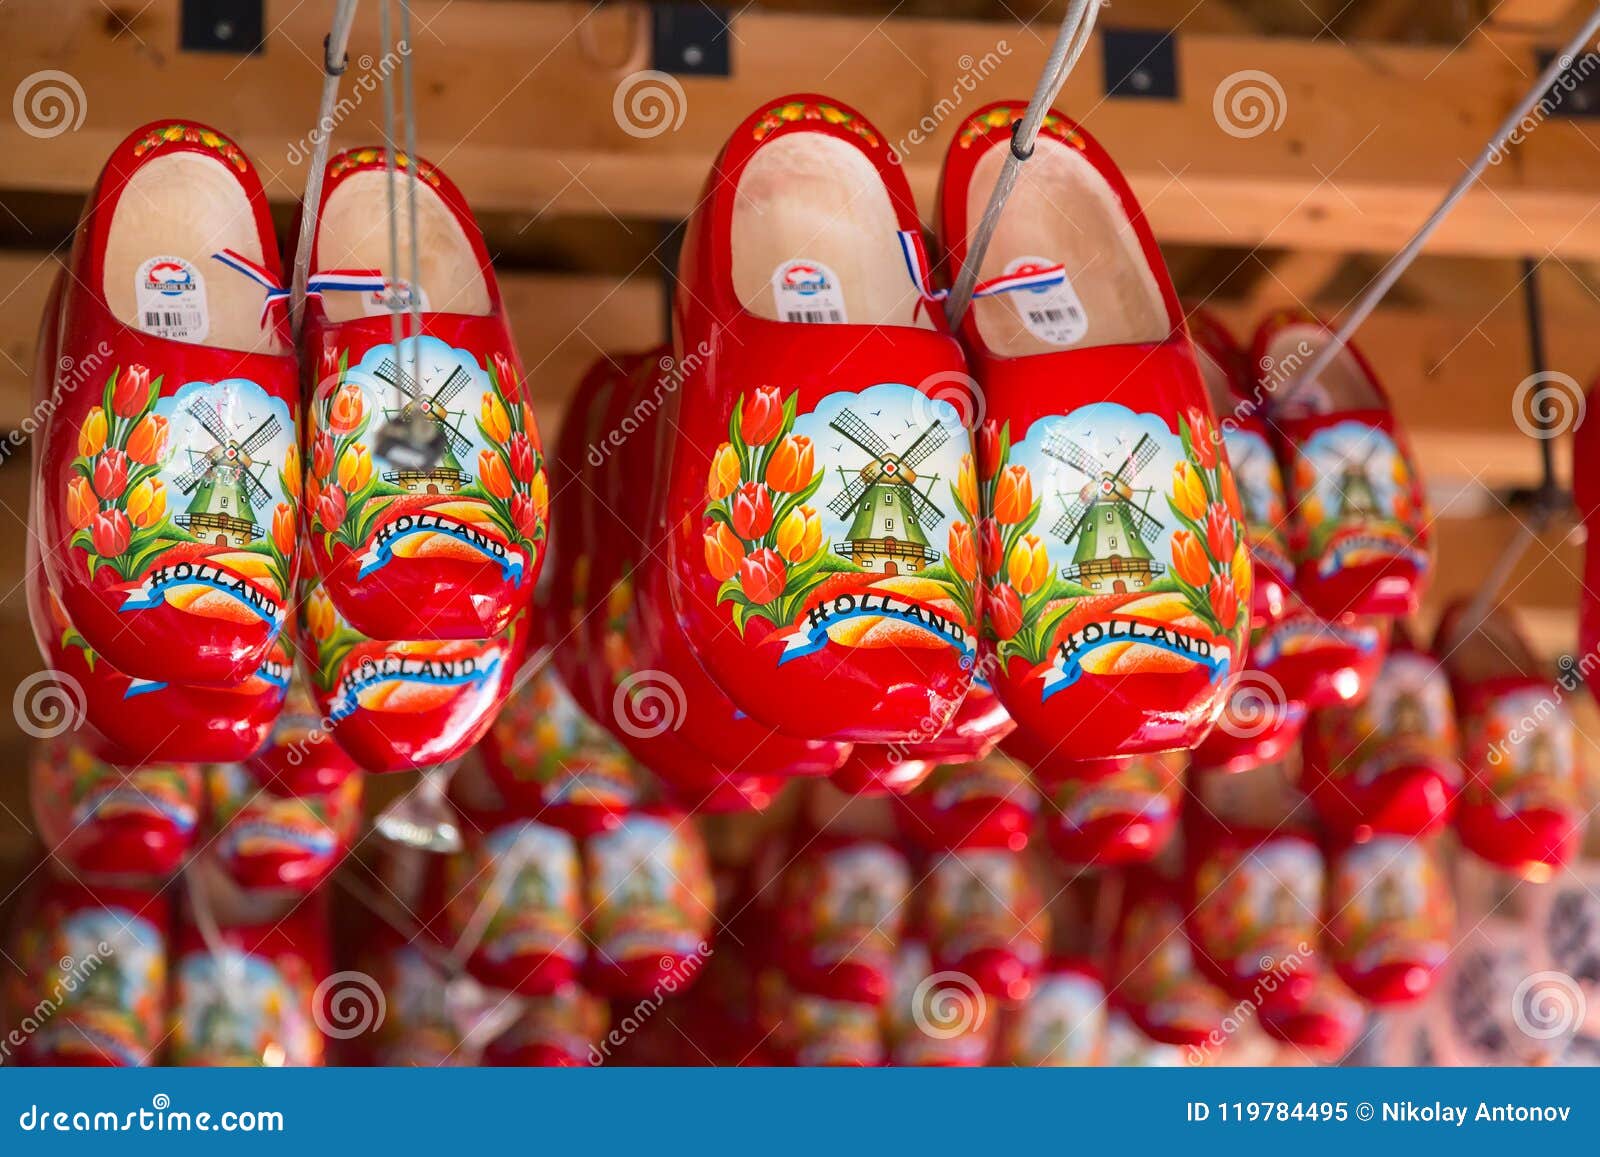 red wooden clogs